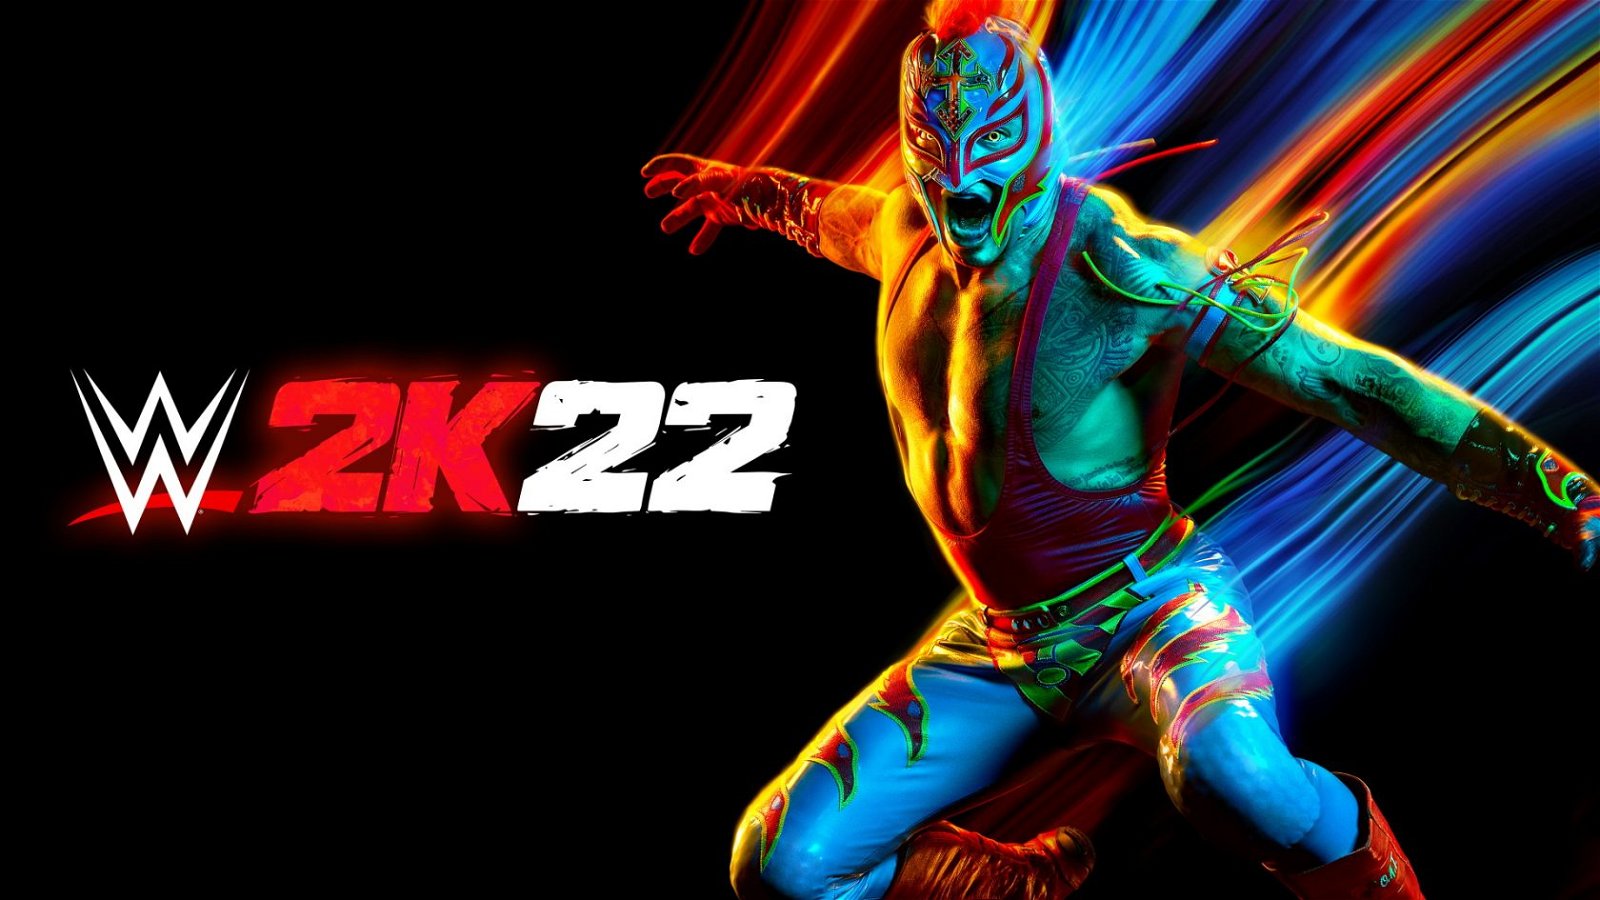 Rey Mysterio Comments On Being Featured On WWE 2K22 Cover